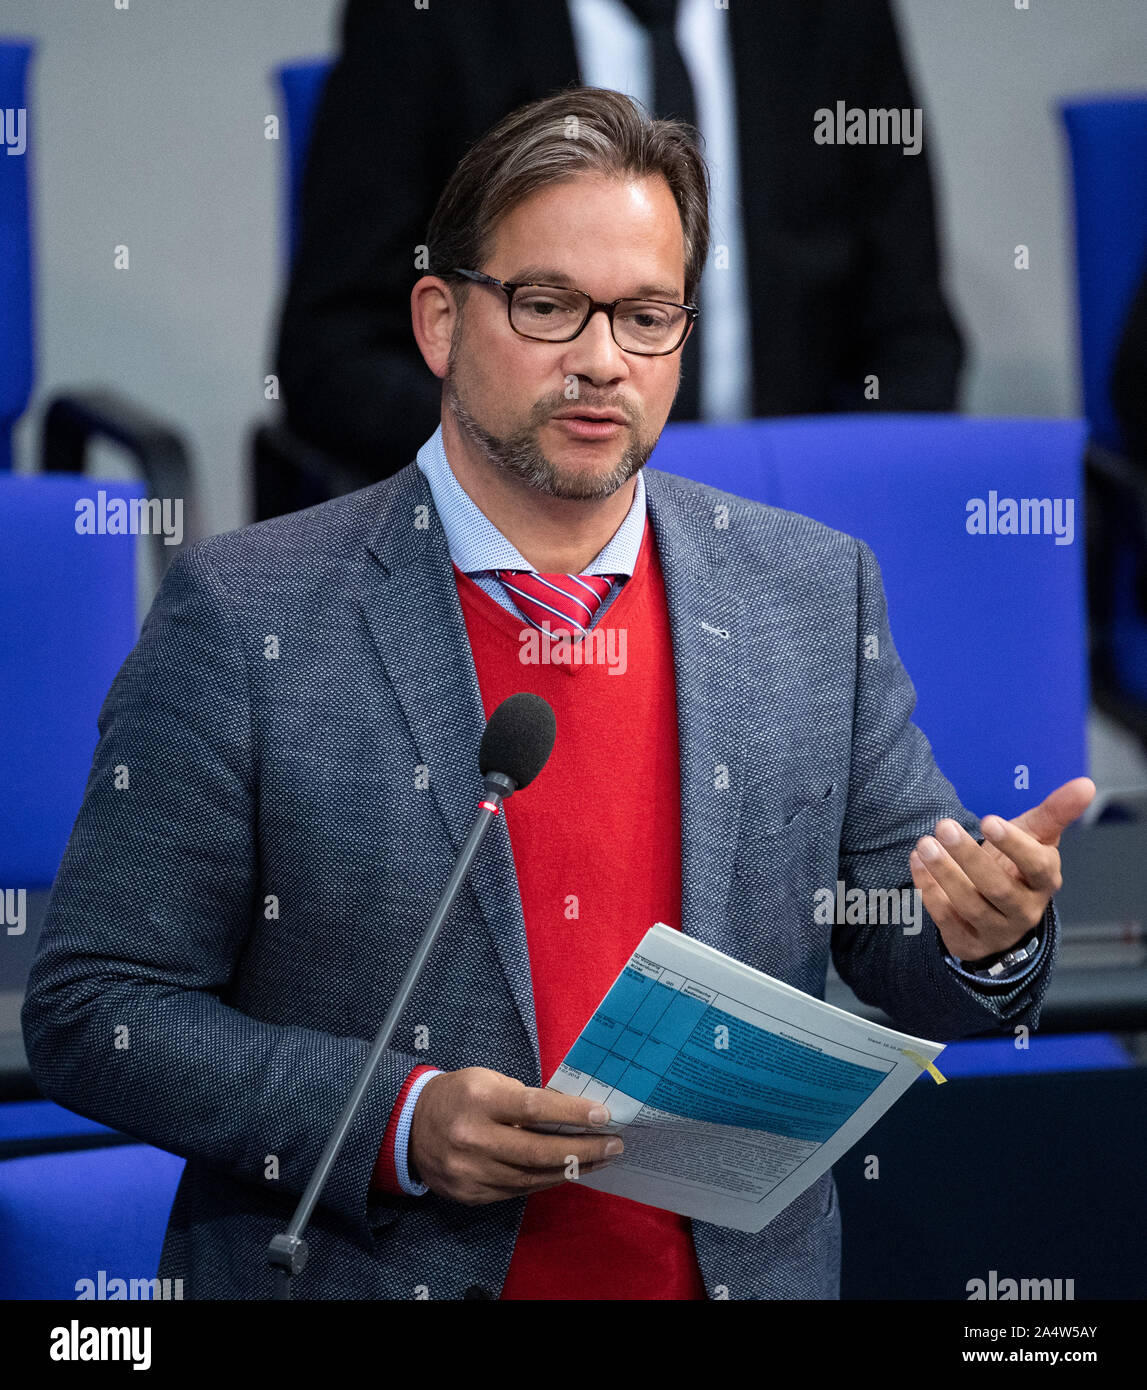 Berlin, Germany. 16th Oct, 2019. Florian Pronold (SPD), Parliamentary State Secretary in the Federal Ministry for the Environment, Nature Conservation and Nuclear Safety, will answer questions from members of the German Bundestag during Question Time at the plenary session of the German Bundestag. The main topics of the 117th session of the 19th legislative period are bills of the Federal Government on property tax reform, the questioning of the Federal Government and a current hour on the invasion of Turkey in Syria. Credit: Bernd von Jutrczenka/dpa/Alamy Live News Stock Photo